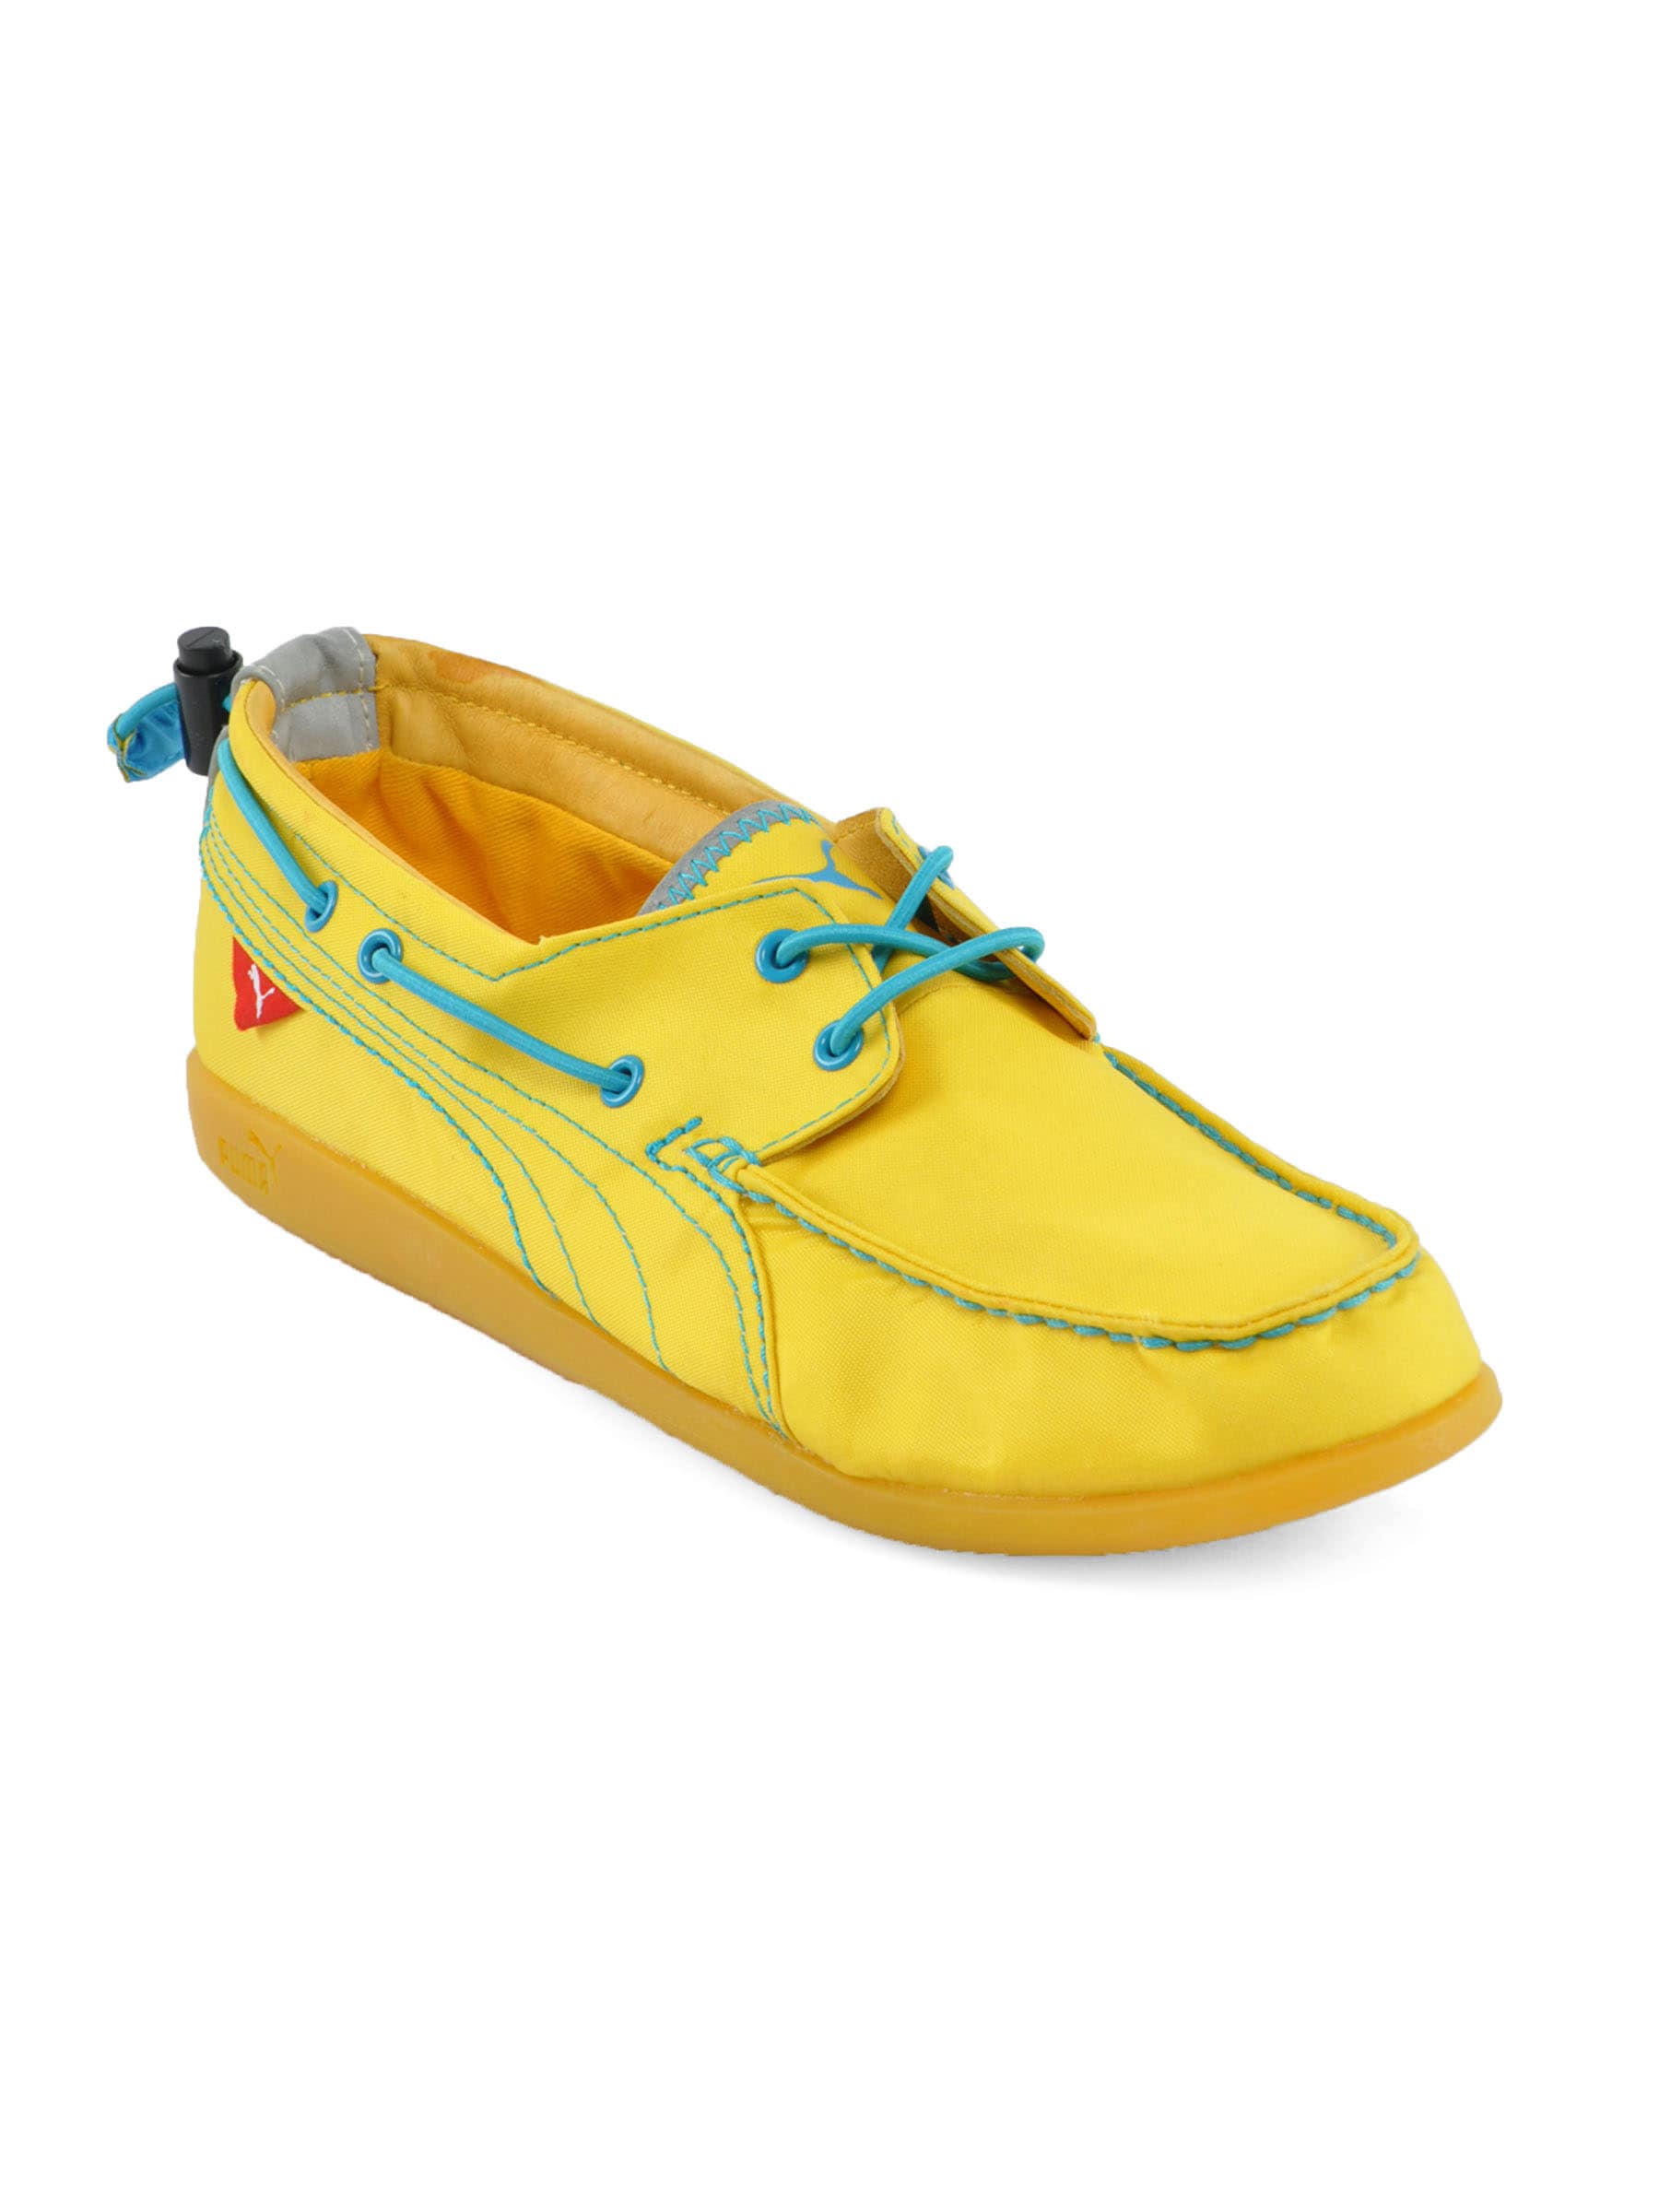 Puma Men Yacht Lifevest Yellow Casual Shoes